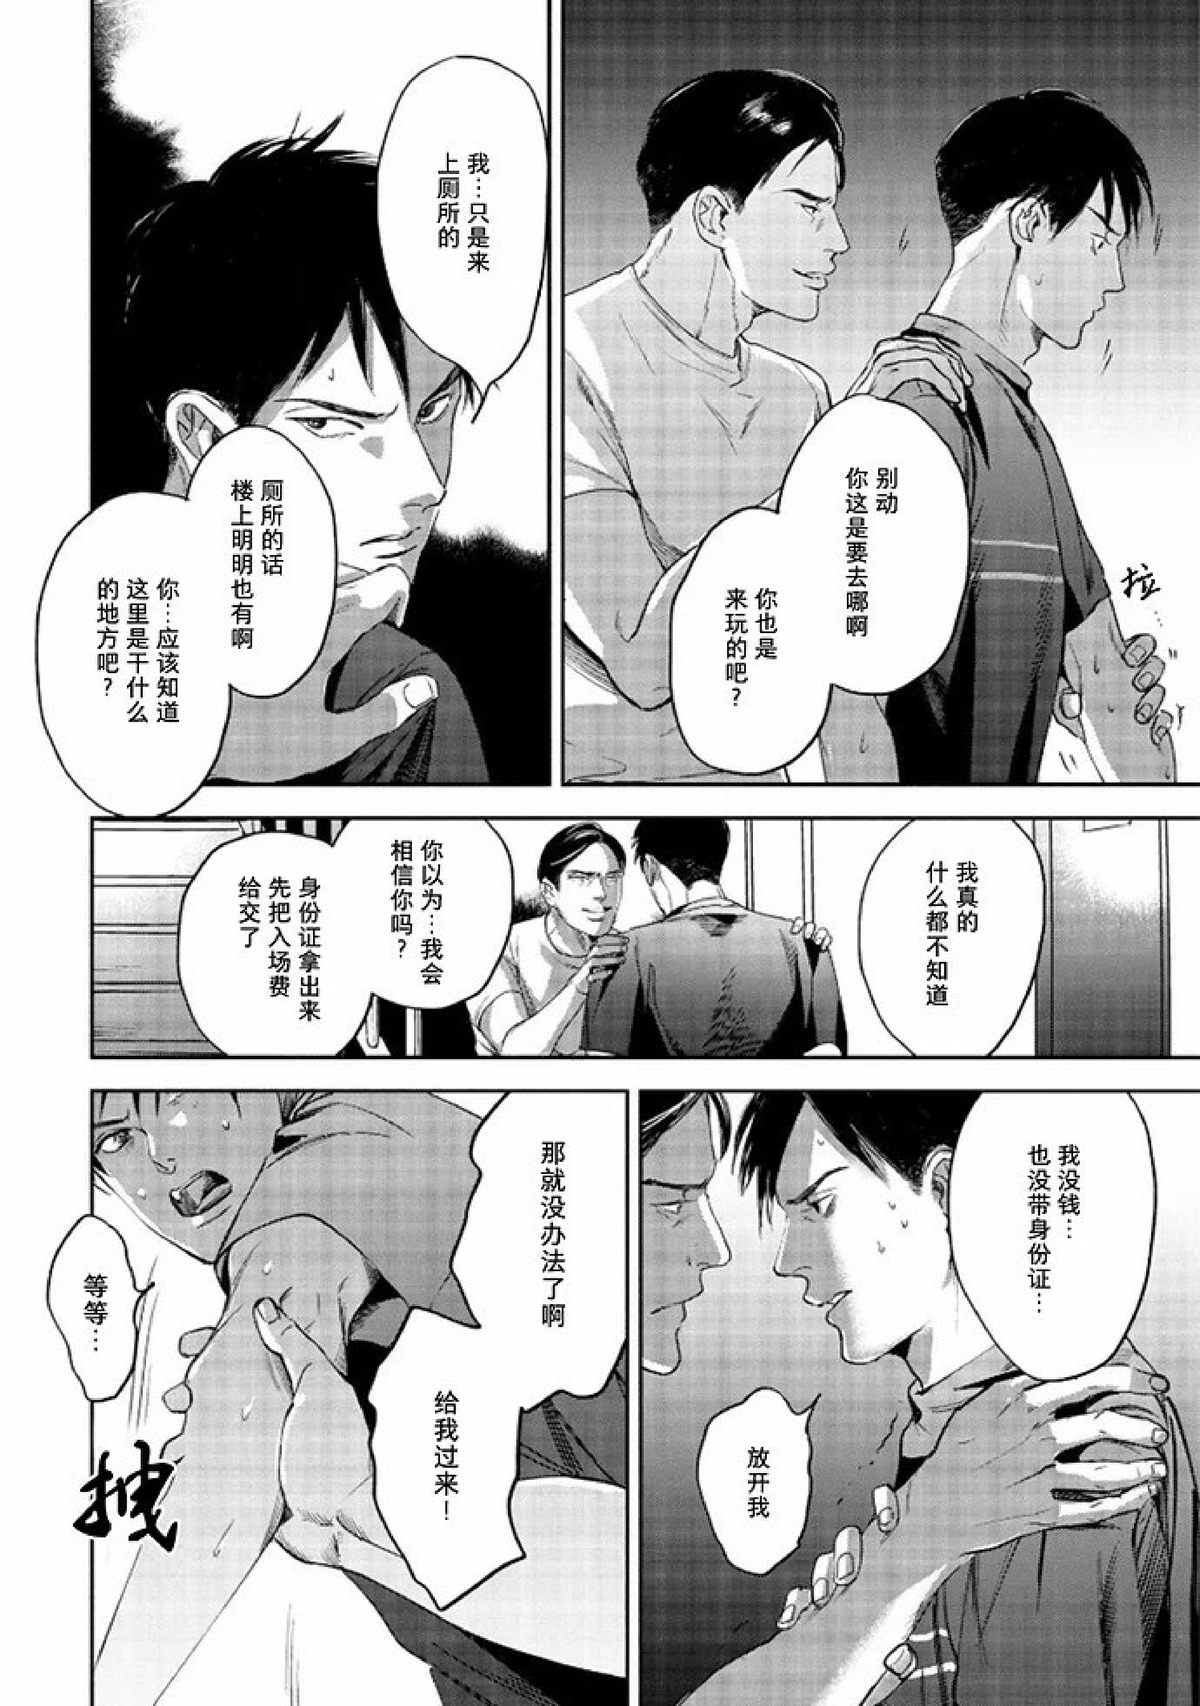 【Two sides of the same coin[耽美]】漫画-（上卷01-02）章节漫画下拉式图片-52.jpg